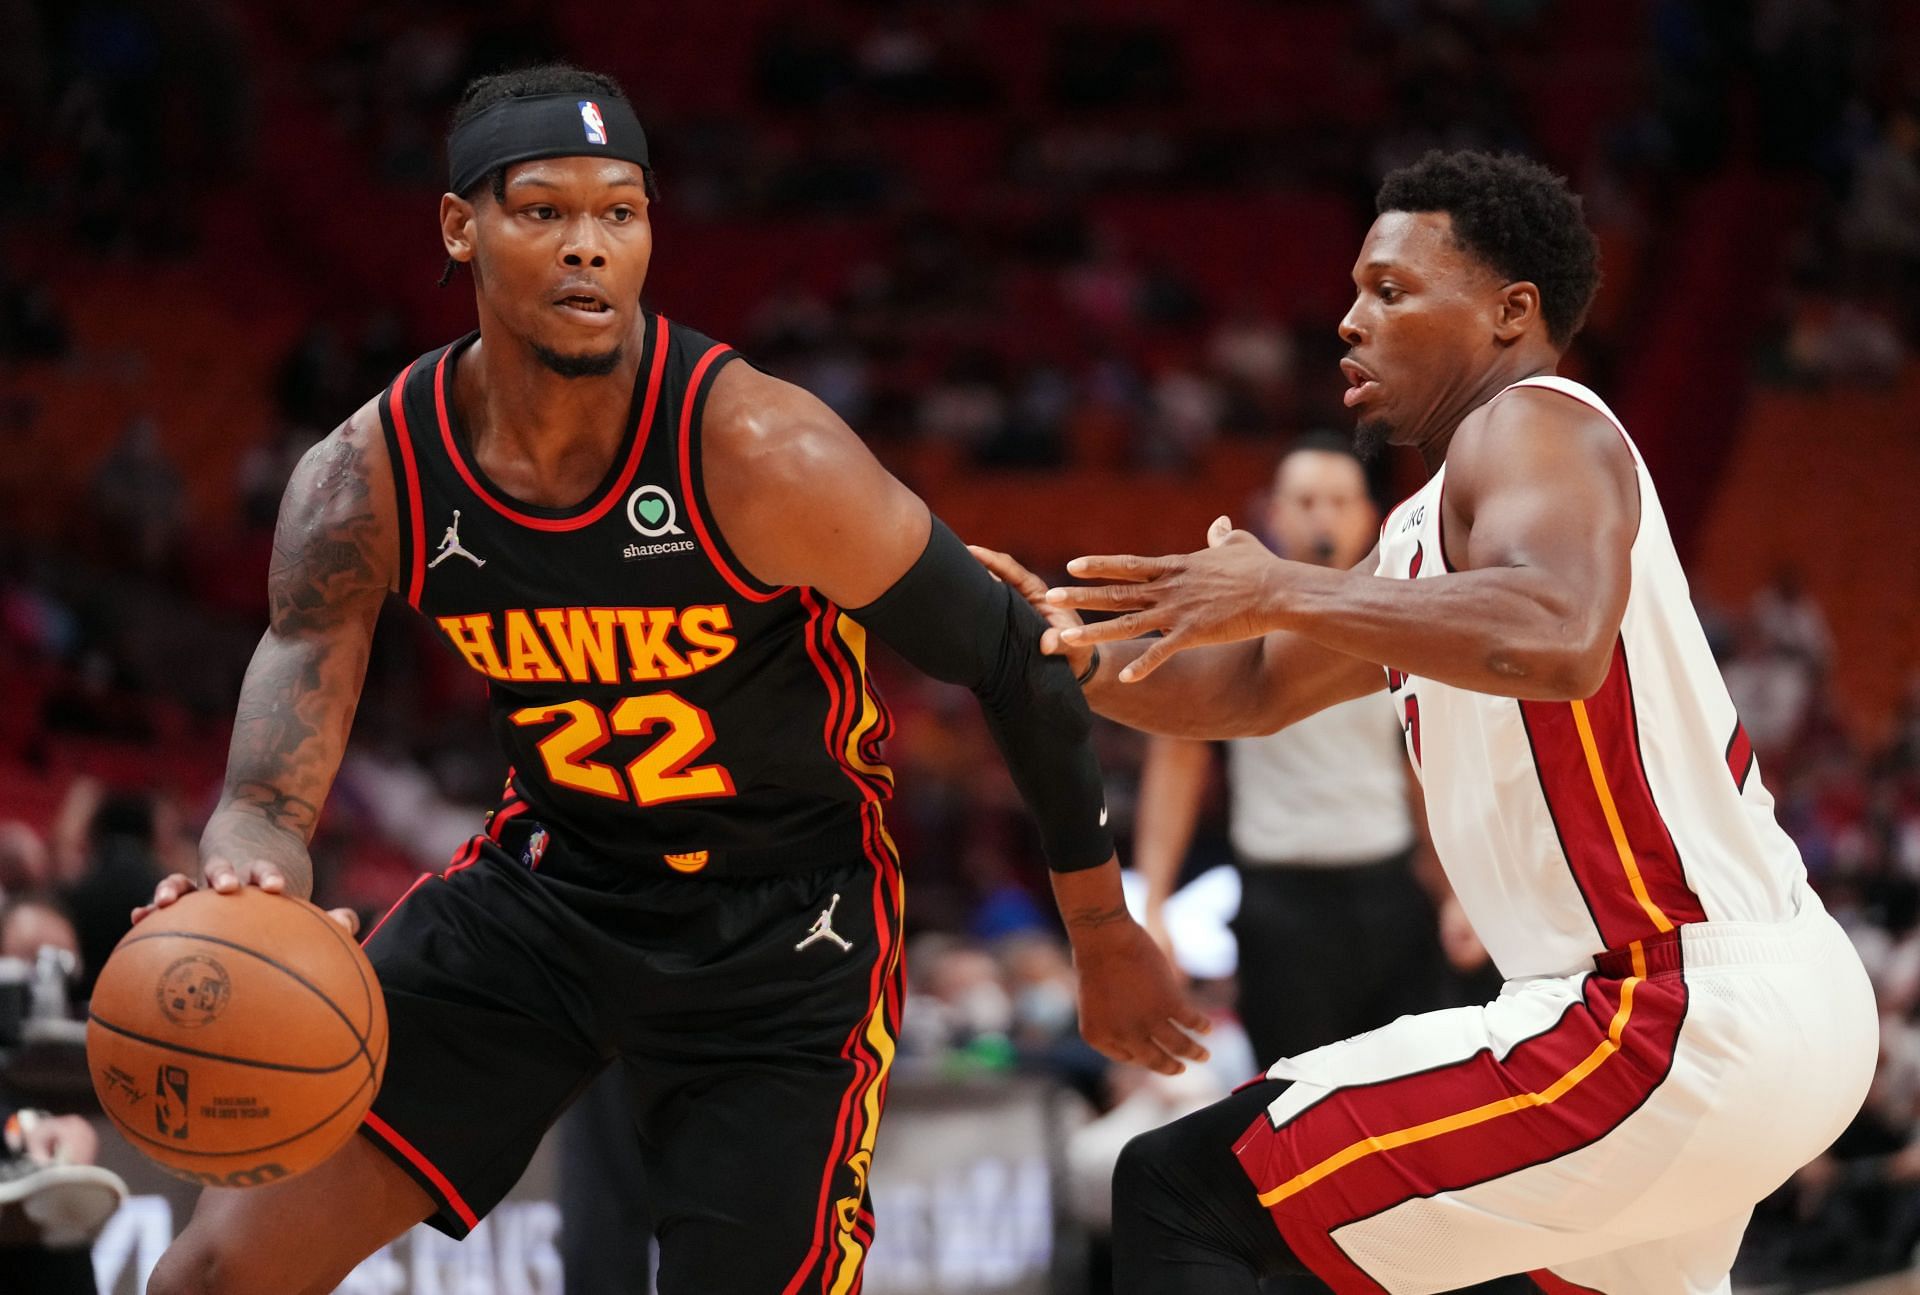 (L) Cam Reddish attempts to drive past the defender (Kyle Lowry)